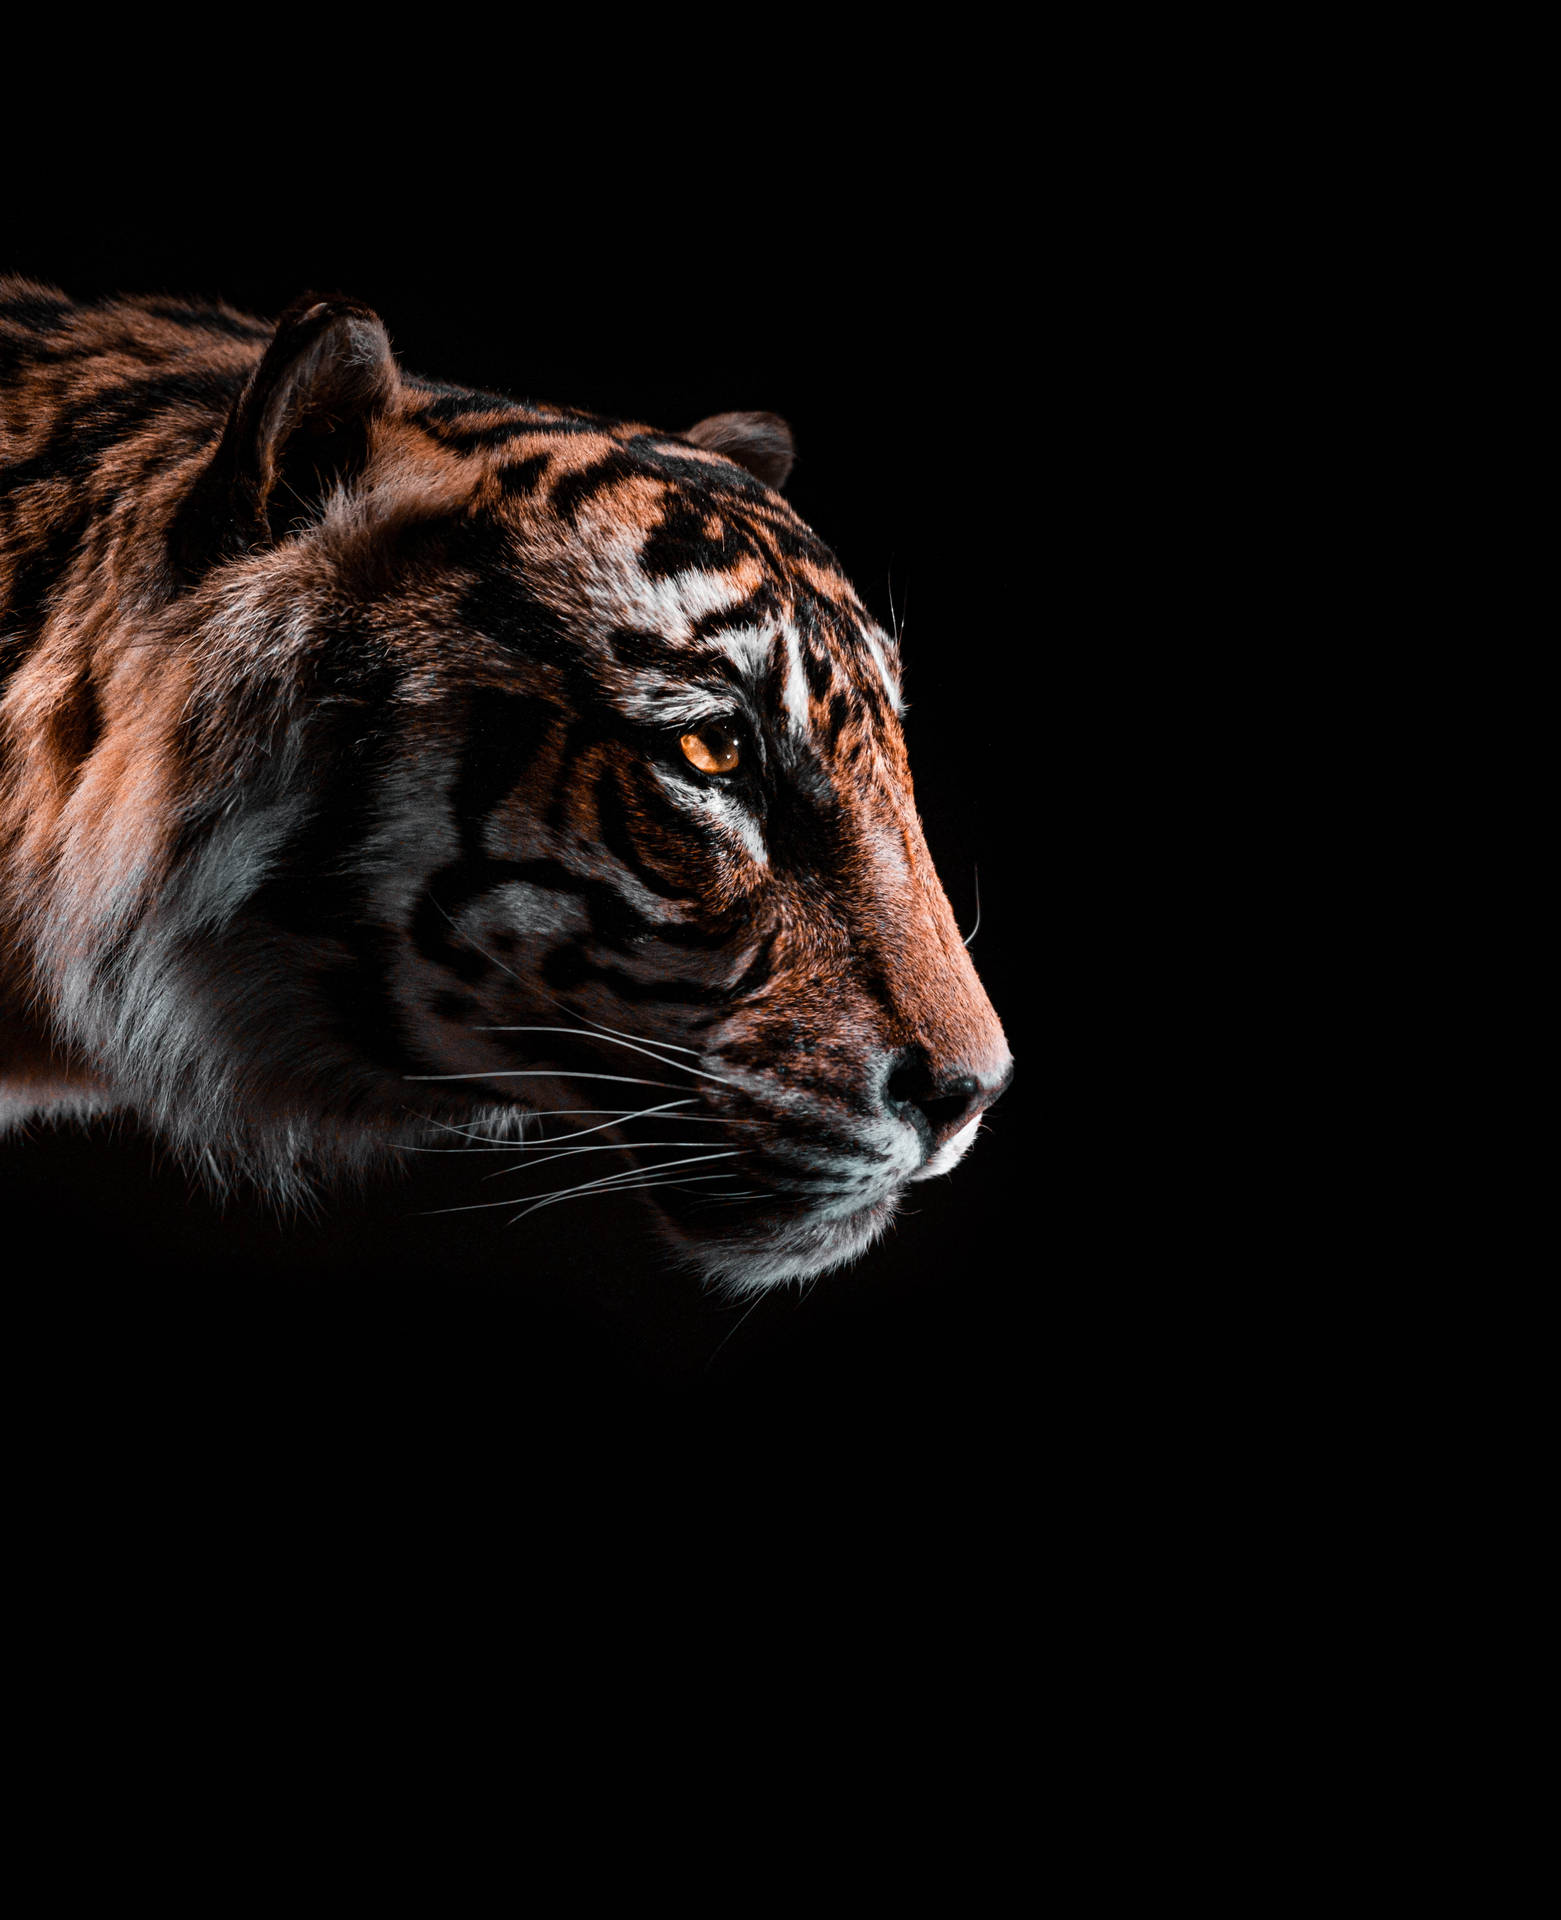 Free Tiger Iphone Wallpaper Downloads, [100+] Tiger Iphone Wallpapers for  FREE 